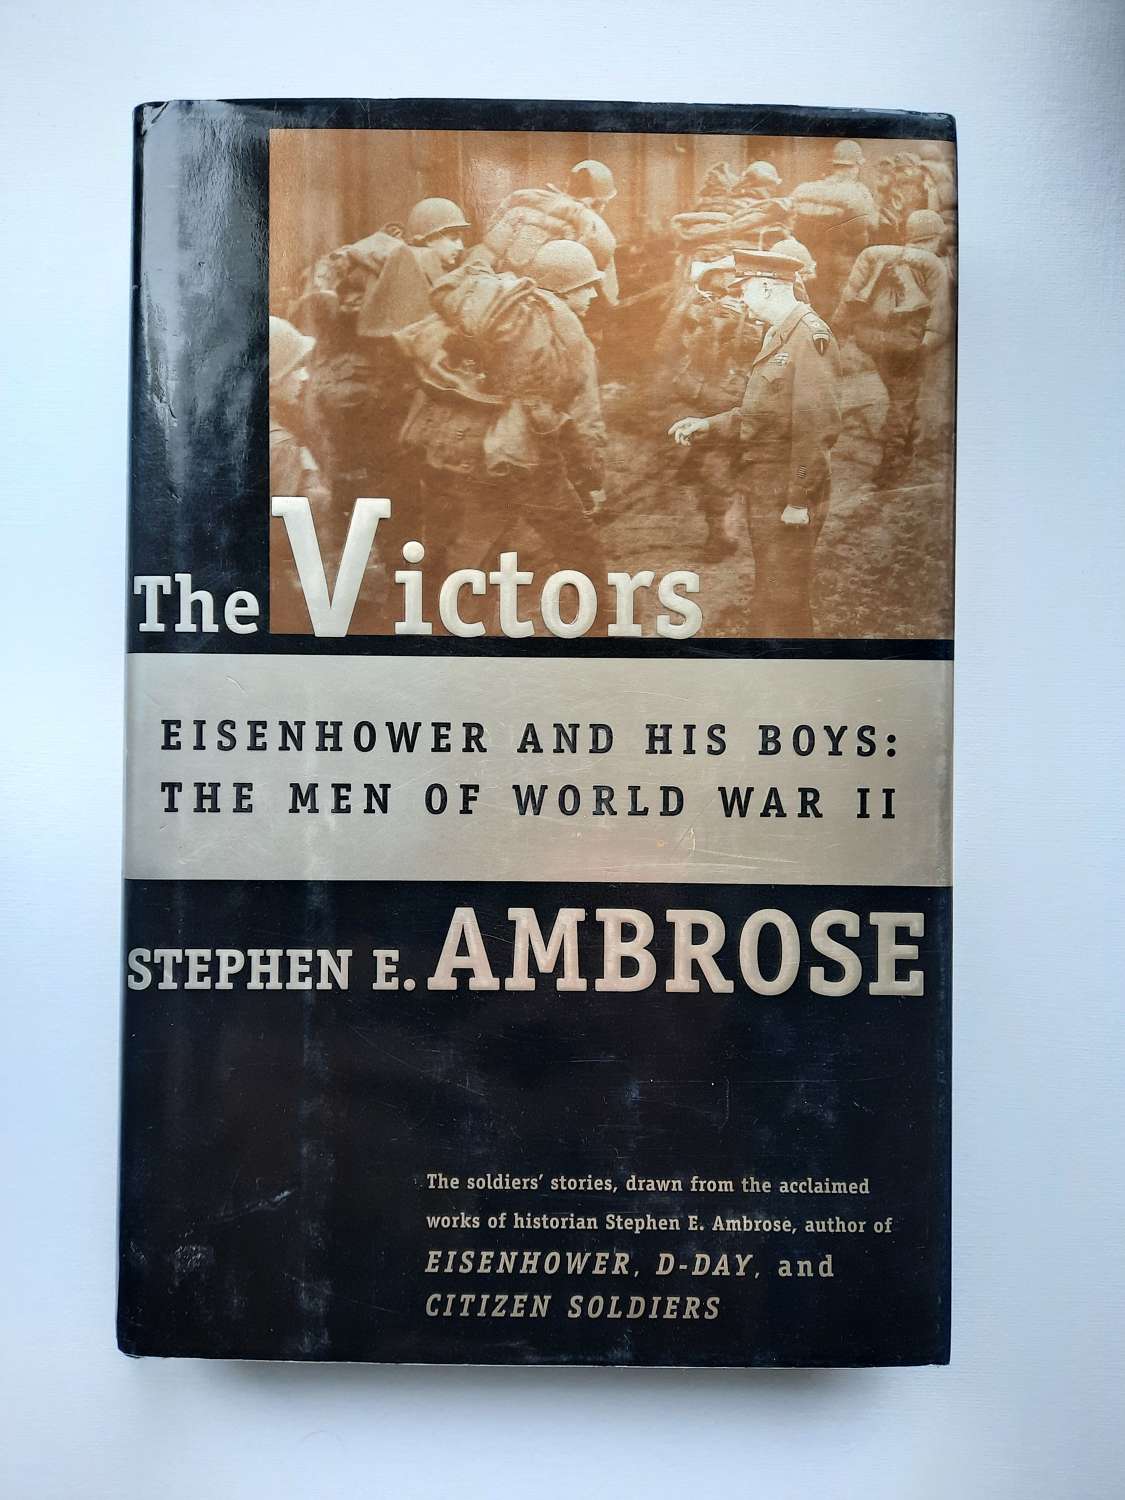 The Victors by Stephen Ambrose.